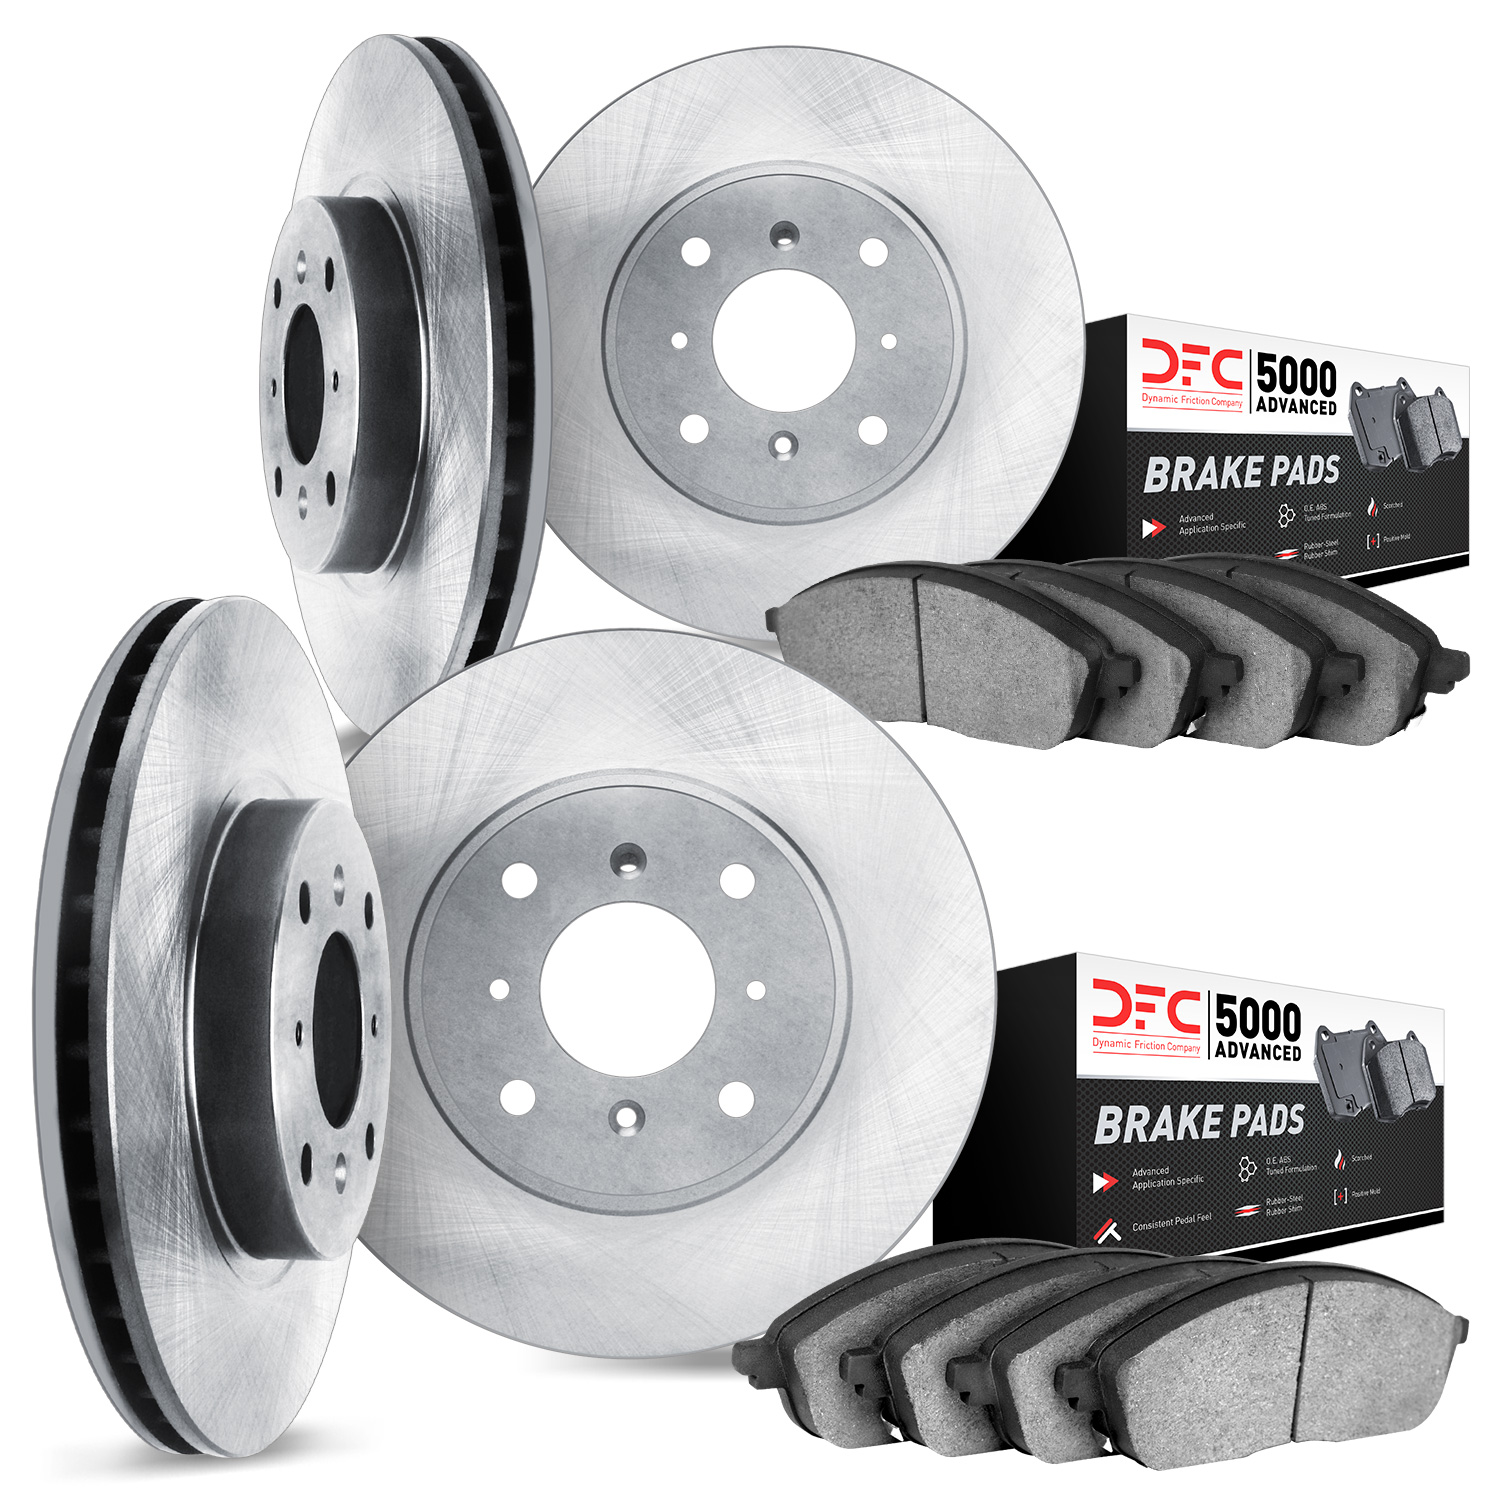 6504-56097 Brake Rotors w/5000 Advanced Brake Pads Kit, 2000-2000 Ford/Lincoln/Mercury/Mazda, Position: Front and Rear